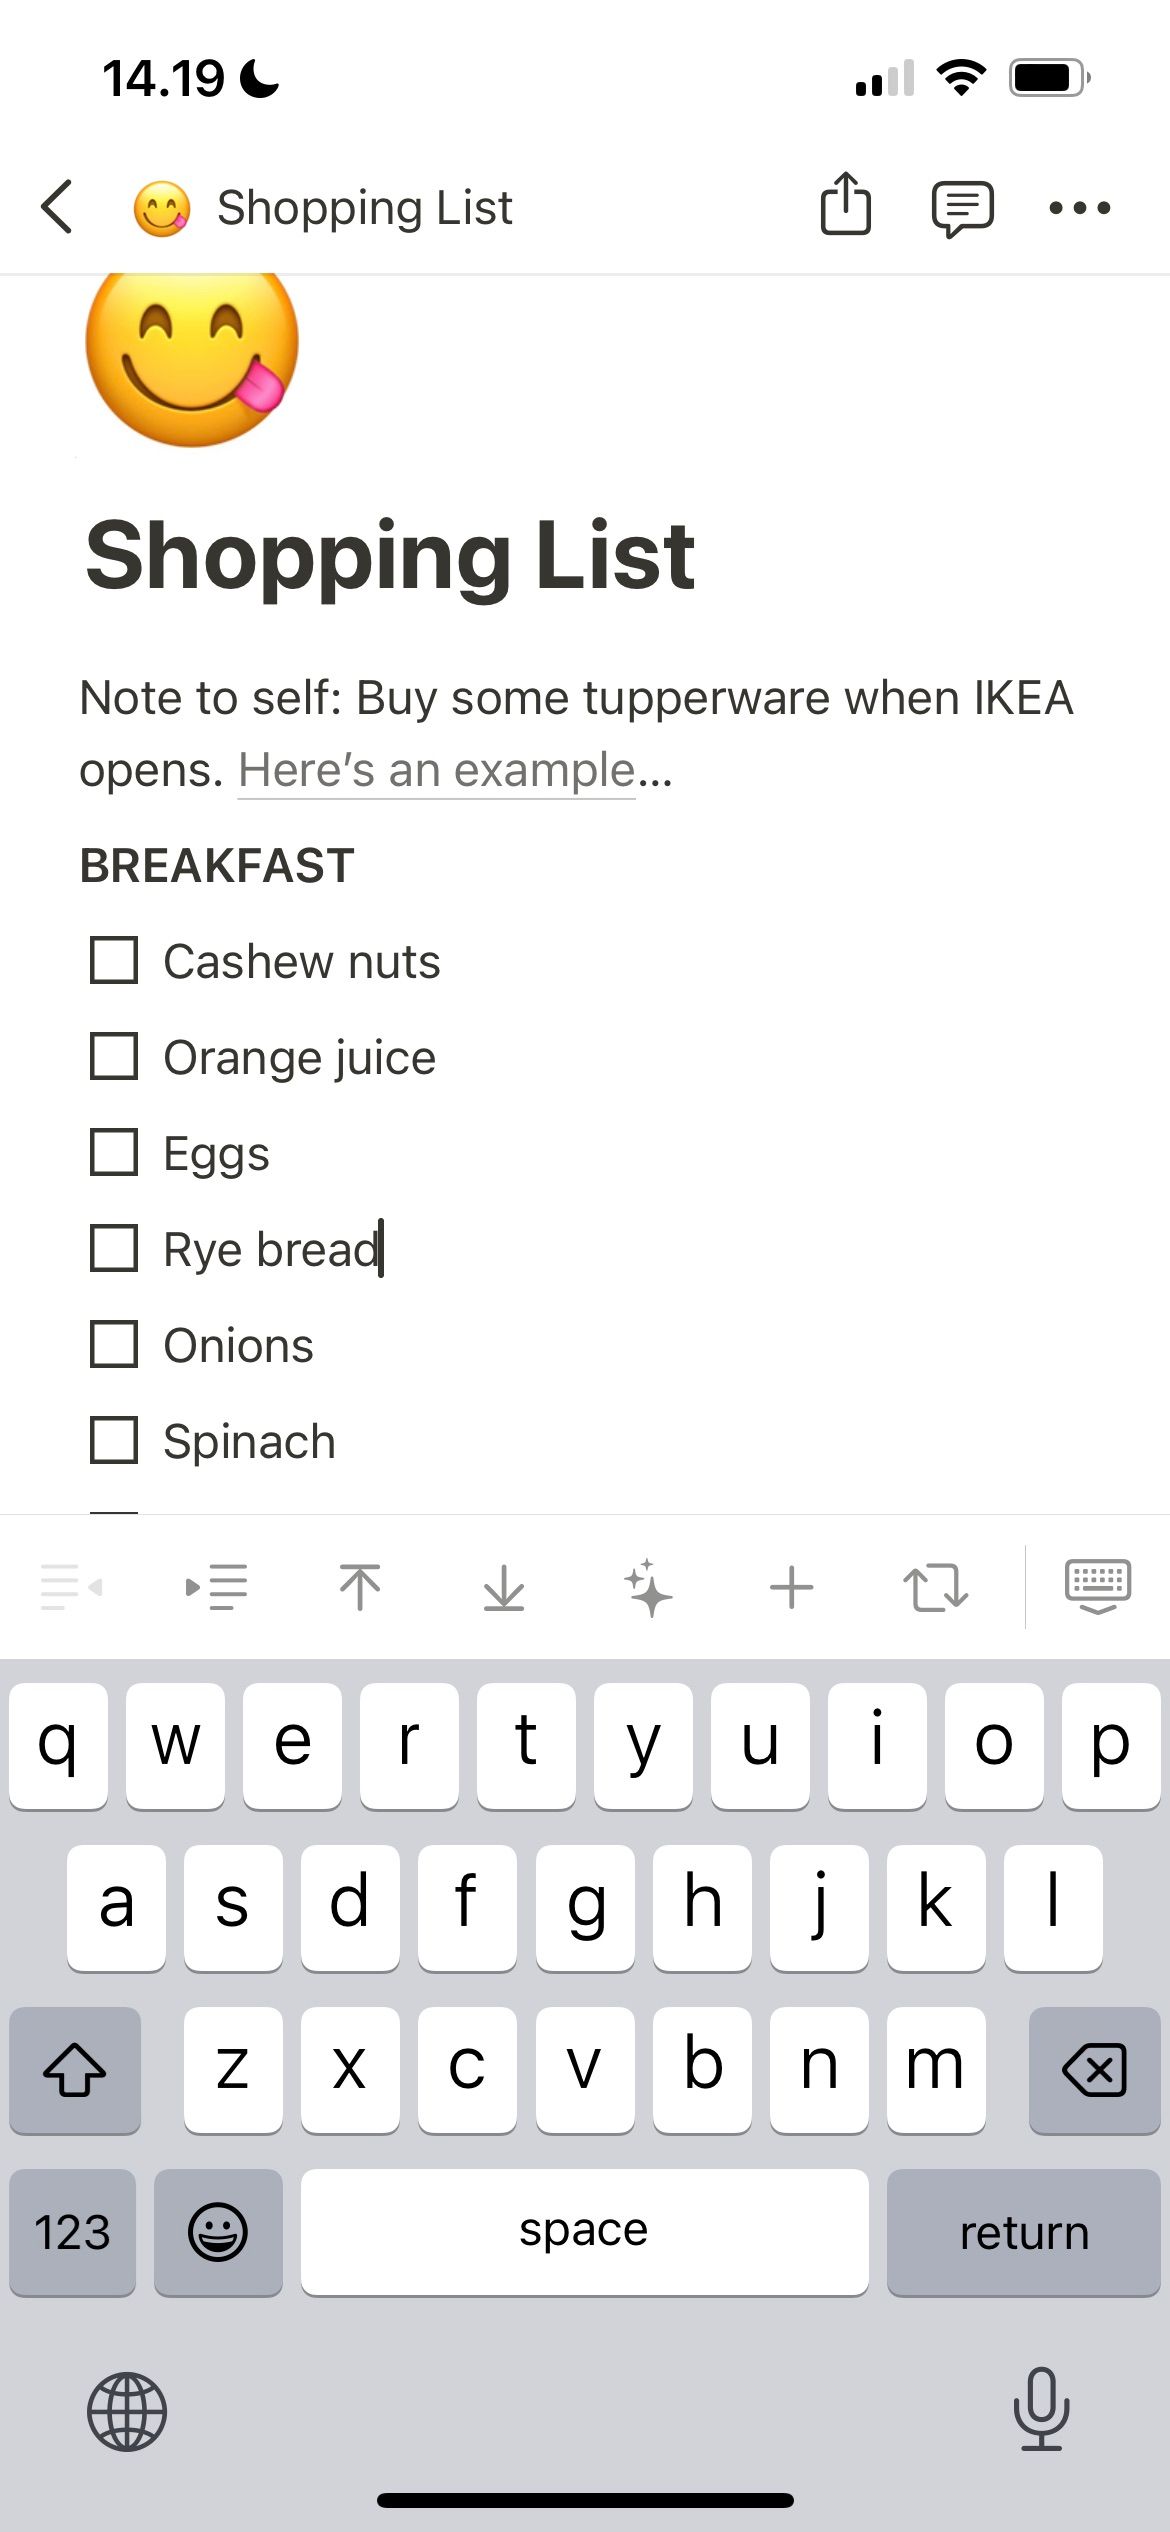 A Shopping List in Notion